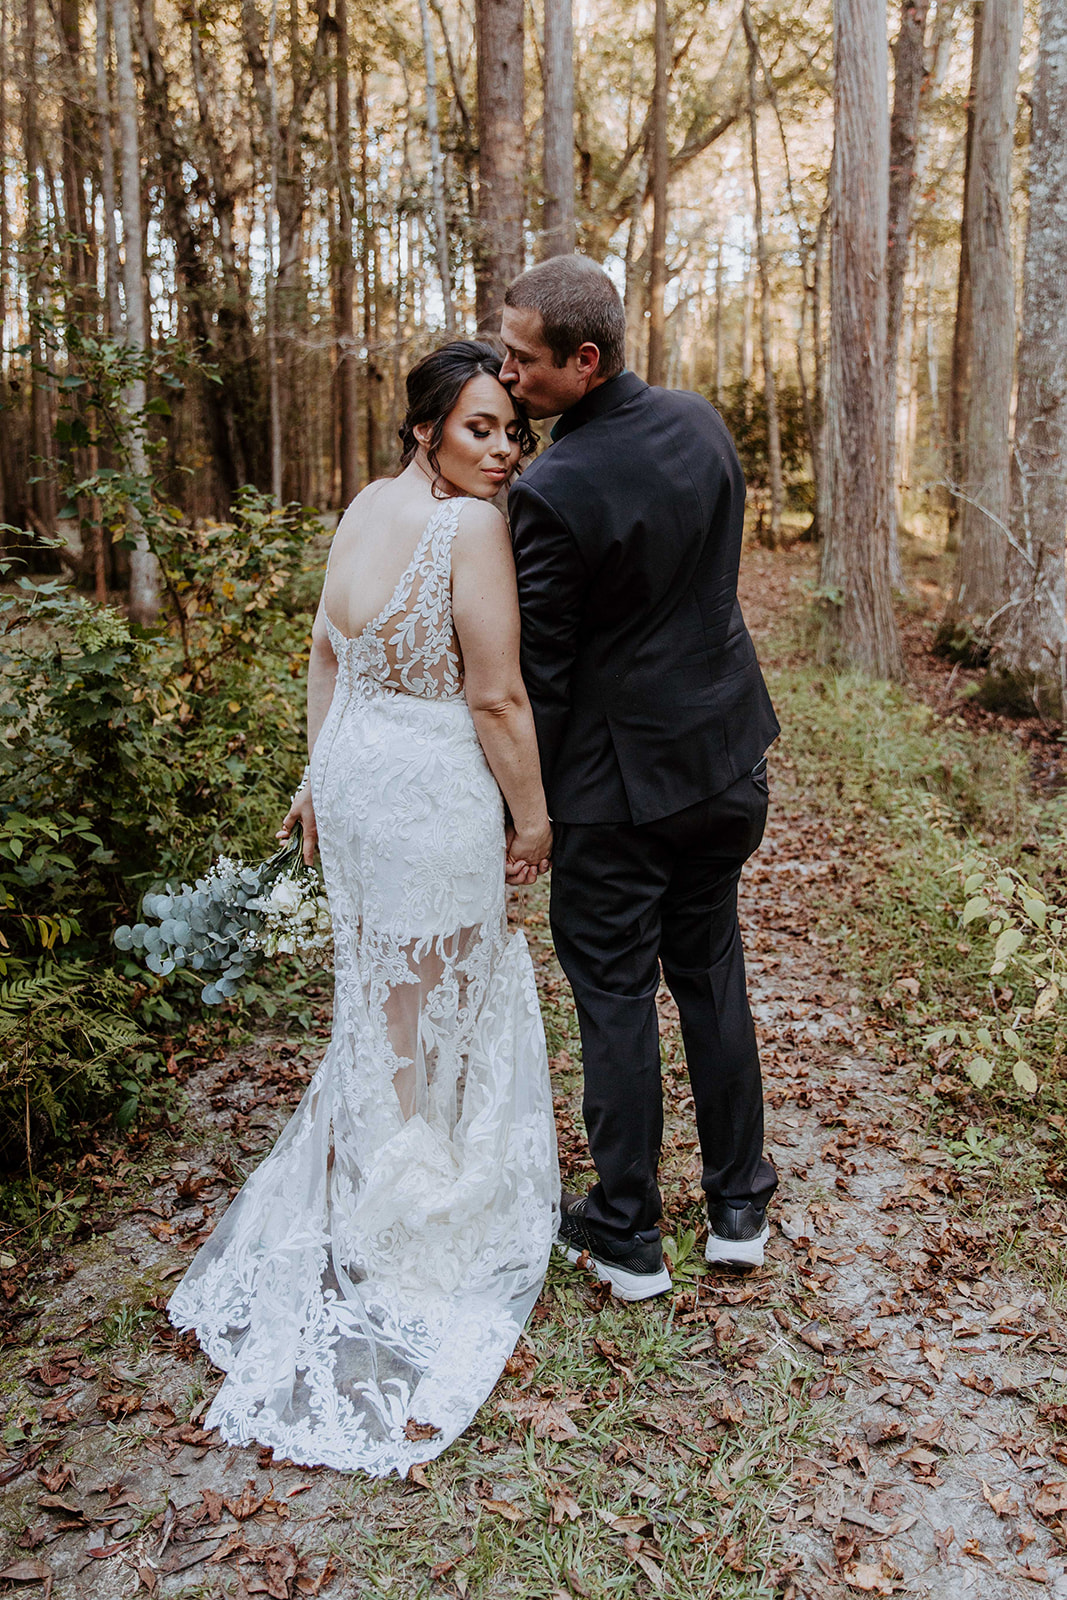 A newlywed couple stands outdoors, the groom in a black suit holding the bride in a white dress who is holding a bouquet. The setting is grassy with trees in the background at their fall elopement